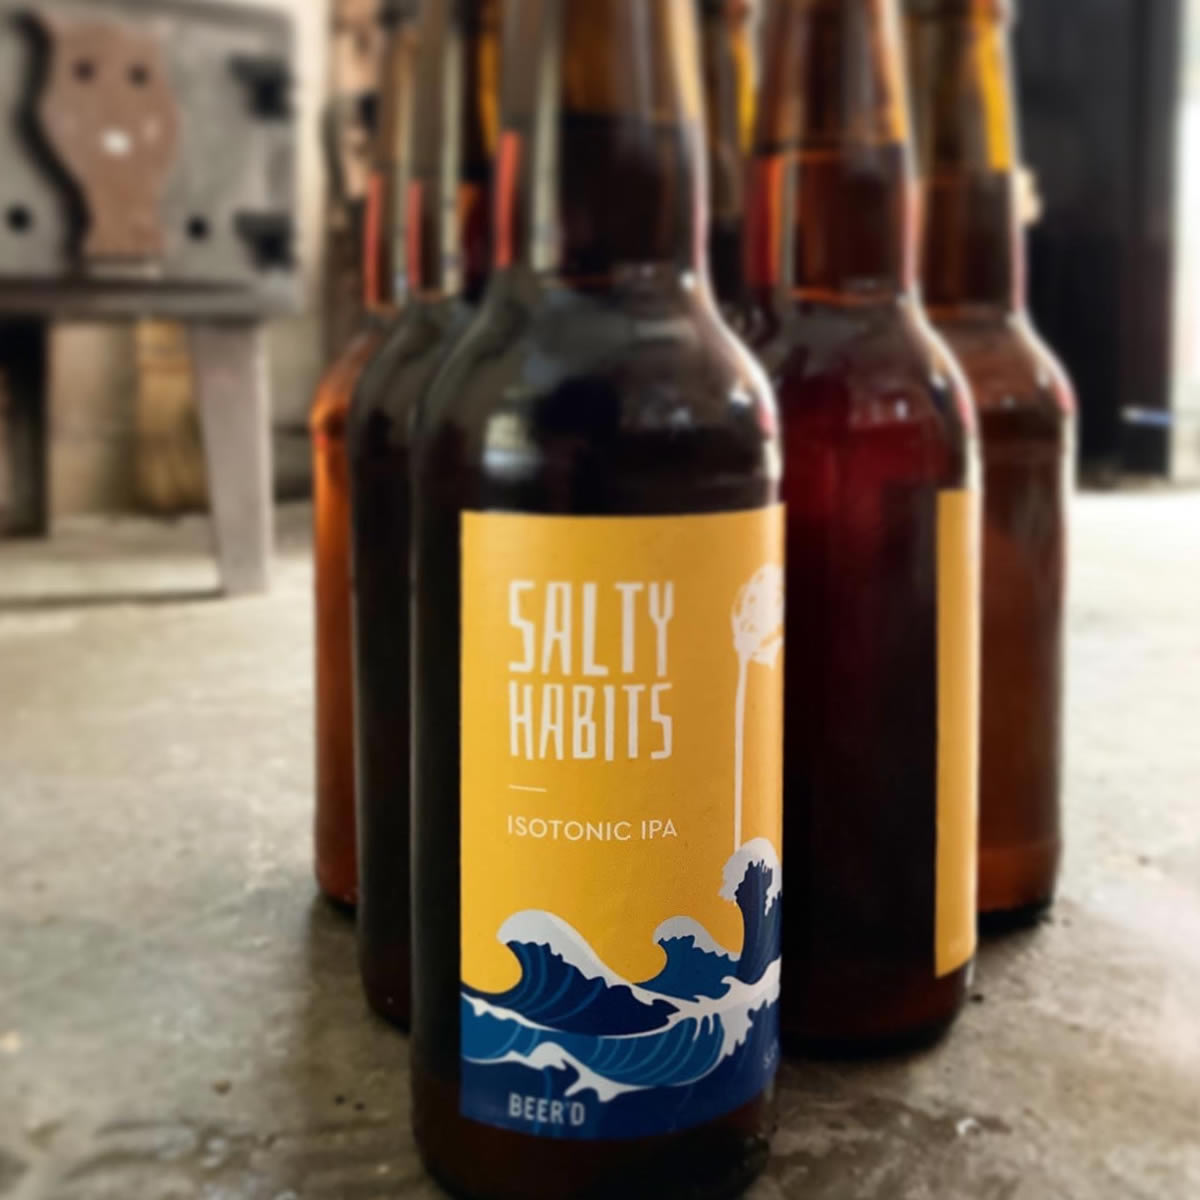 Limited production American IPA for Salty Habits – IKO Certified Kite Instructor